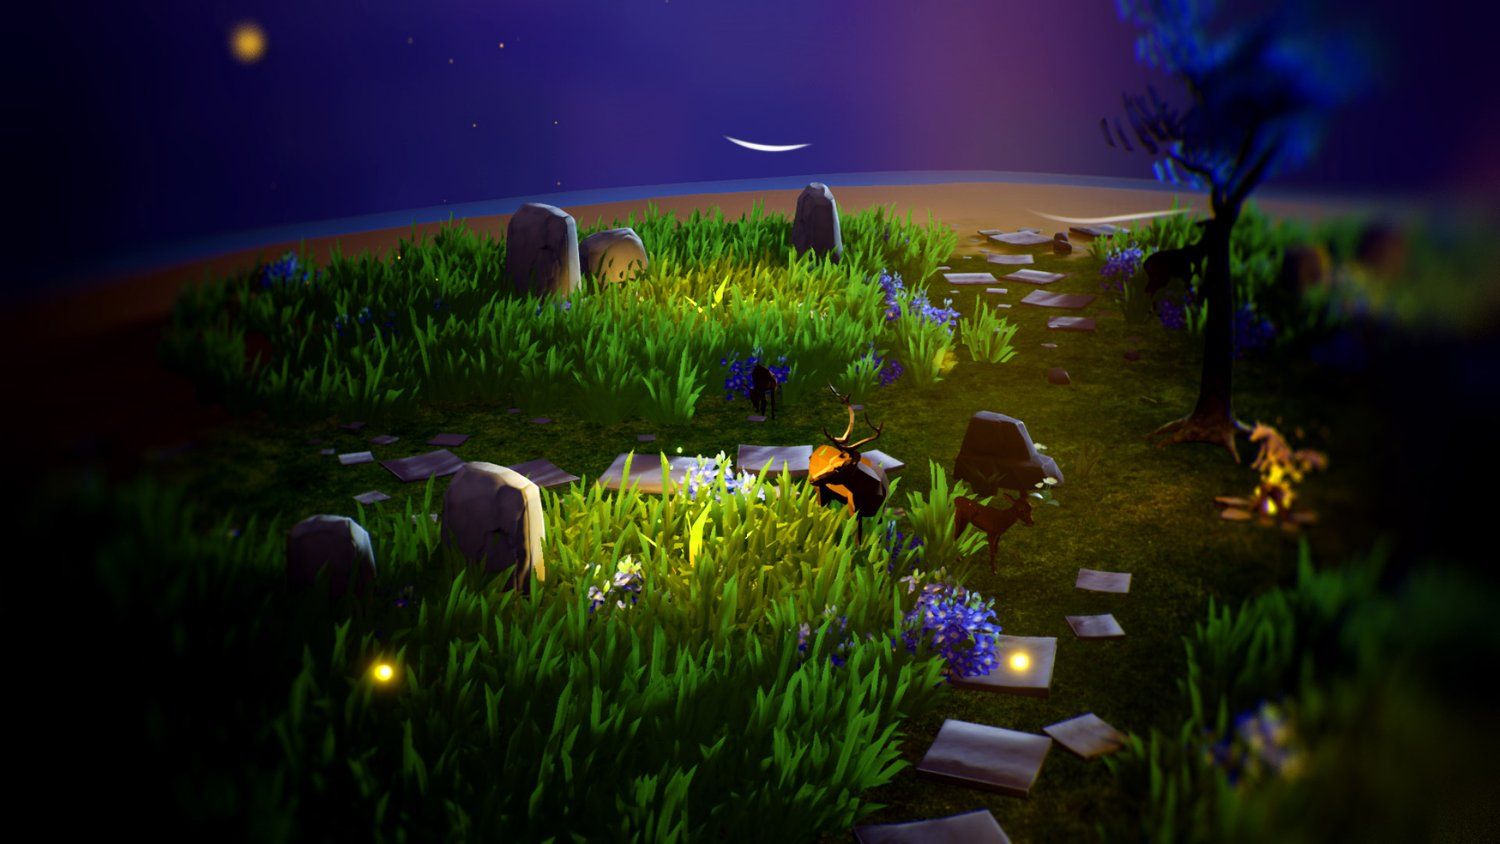 A screenshot from the game. A low-poly island at night, covered in long grass, blue-leaved trees, and small rocky paths.